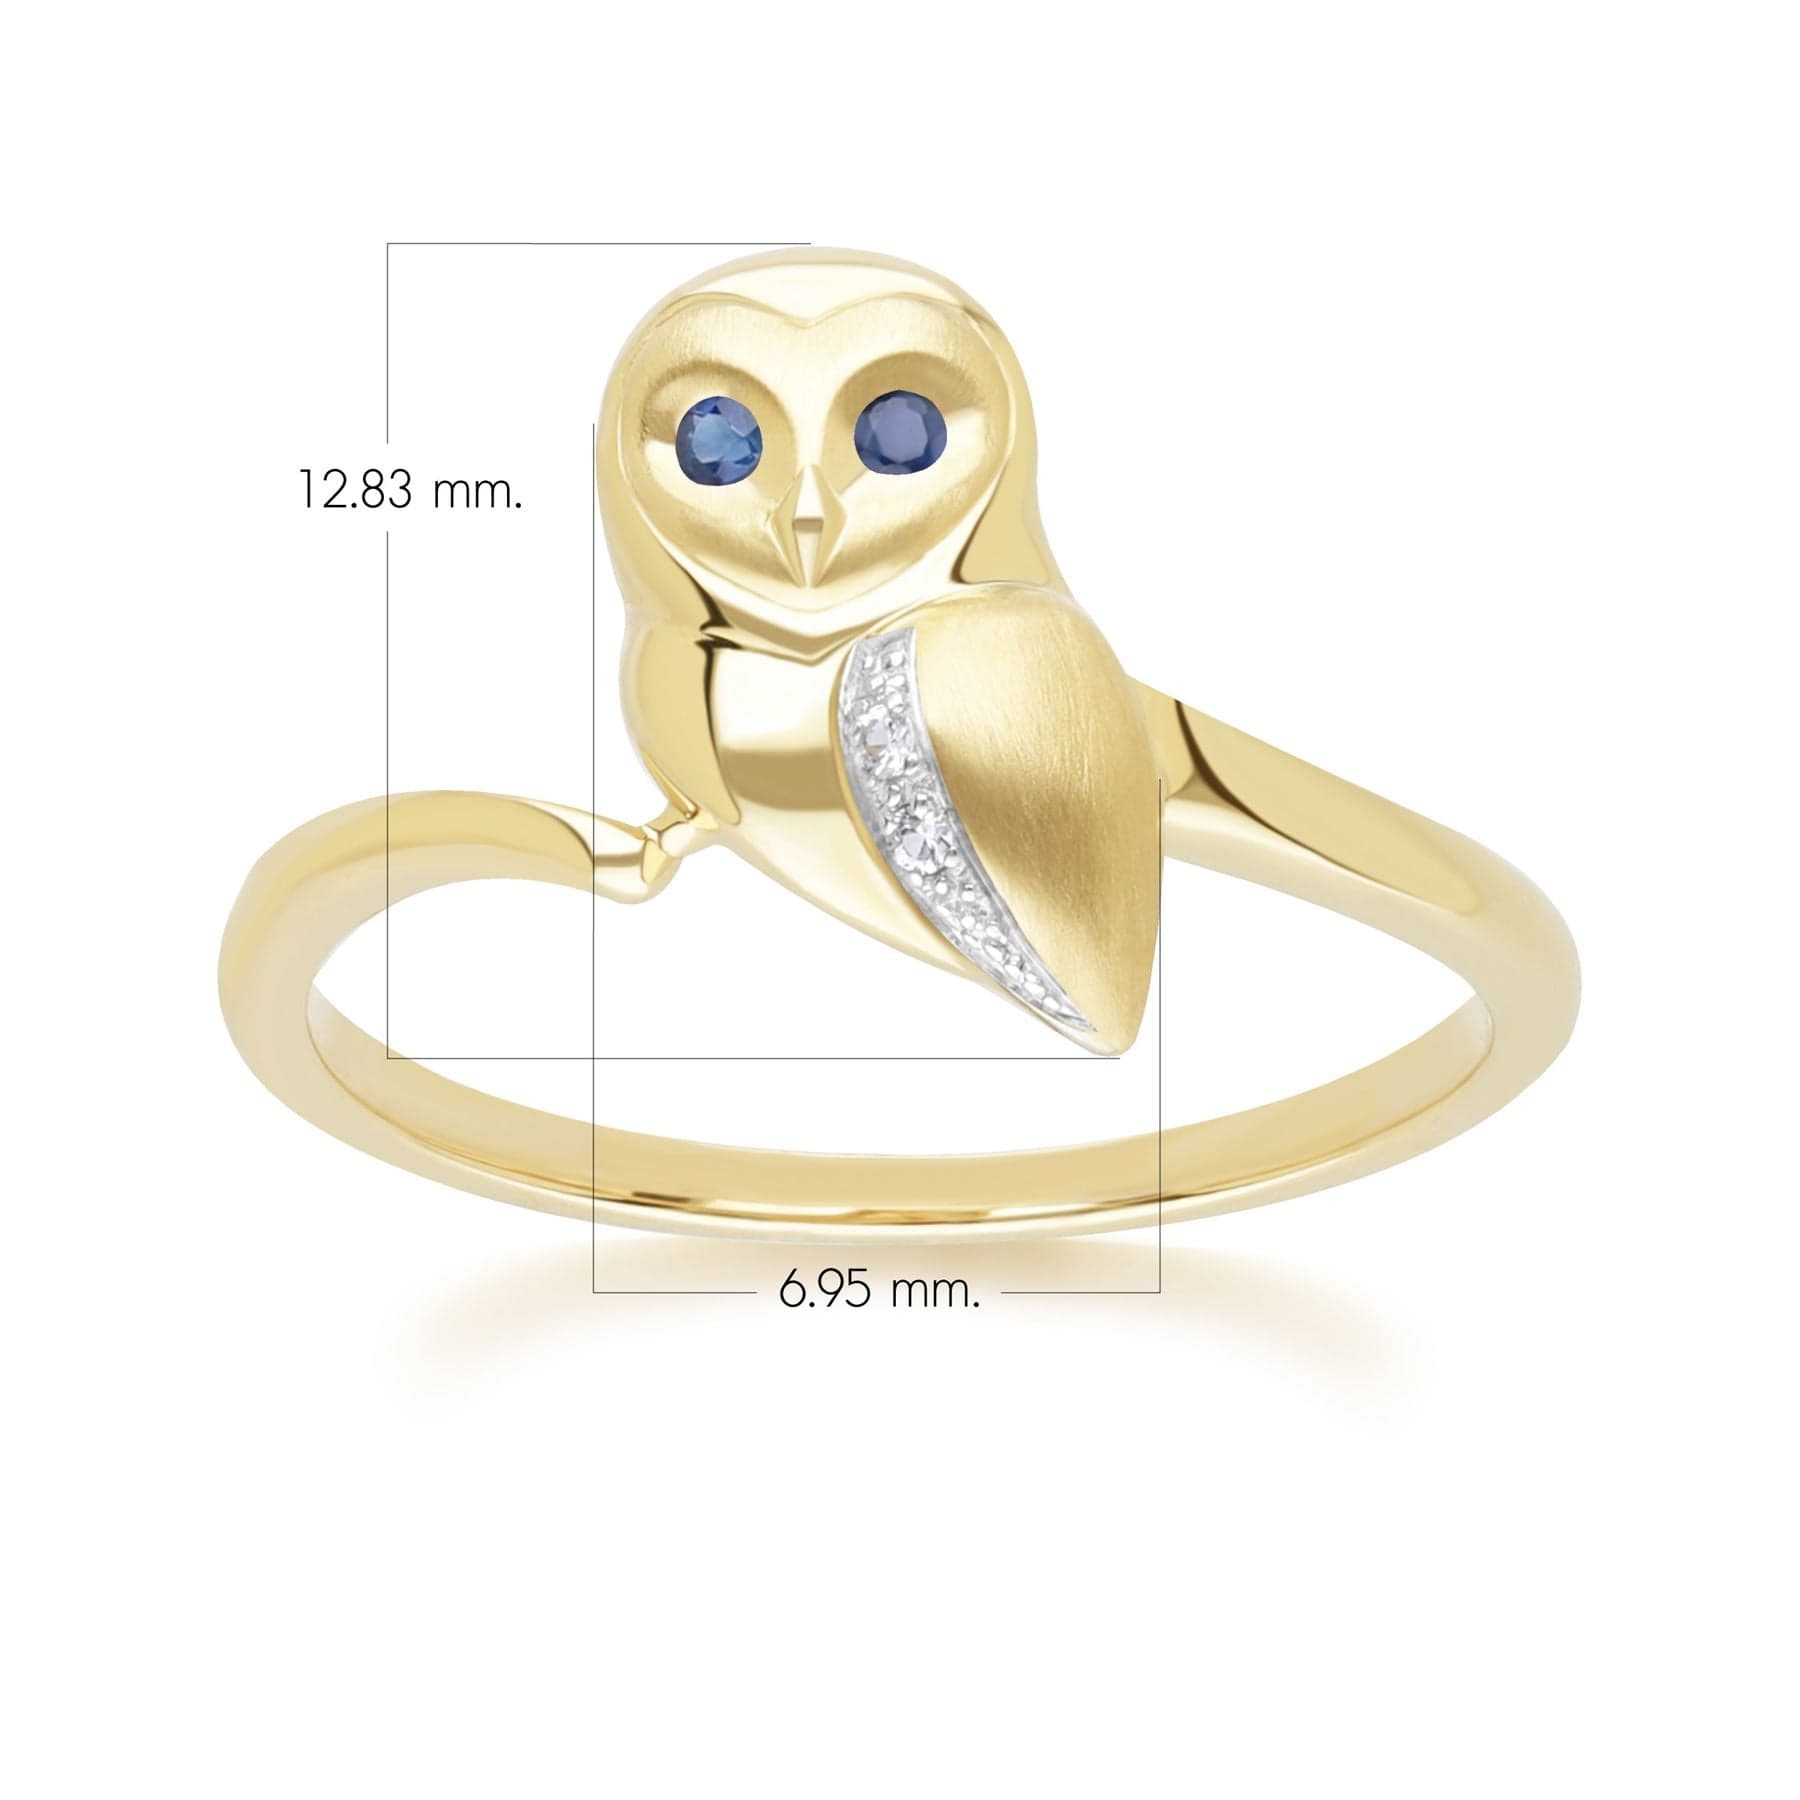 135R2103039 Gardenia Sapphire and White Sapphire Owl Ring in 9ct Yellow Gold Dimensions